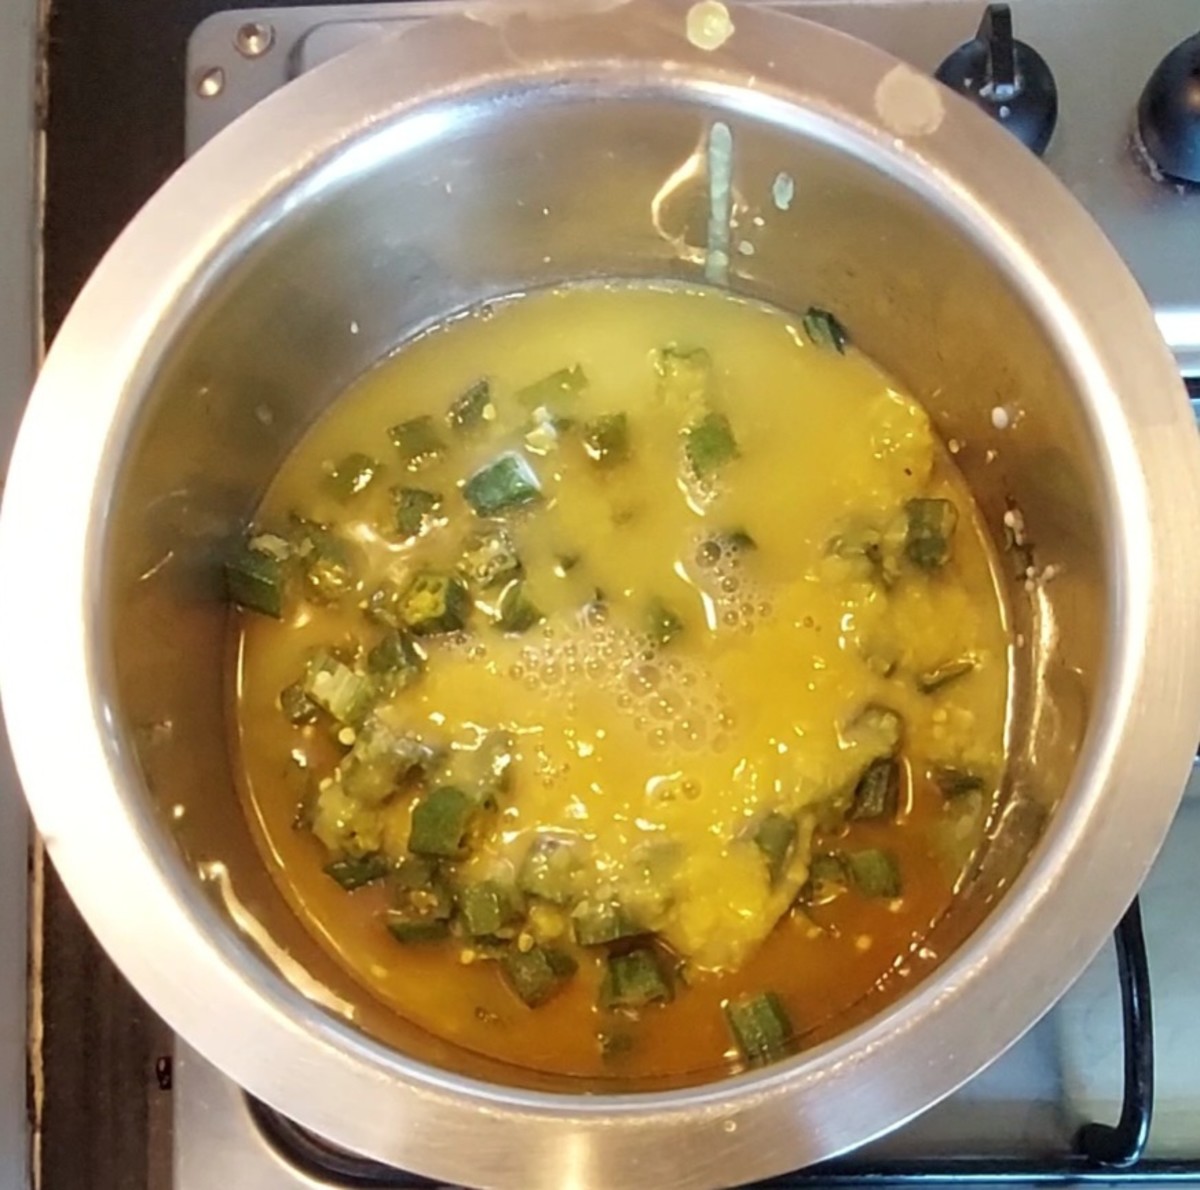 Once lady's fingers are cooked well, add cooked dal and 1 cup of water. Mix and combine well. Adjust salt and mix.